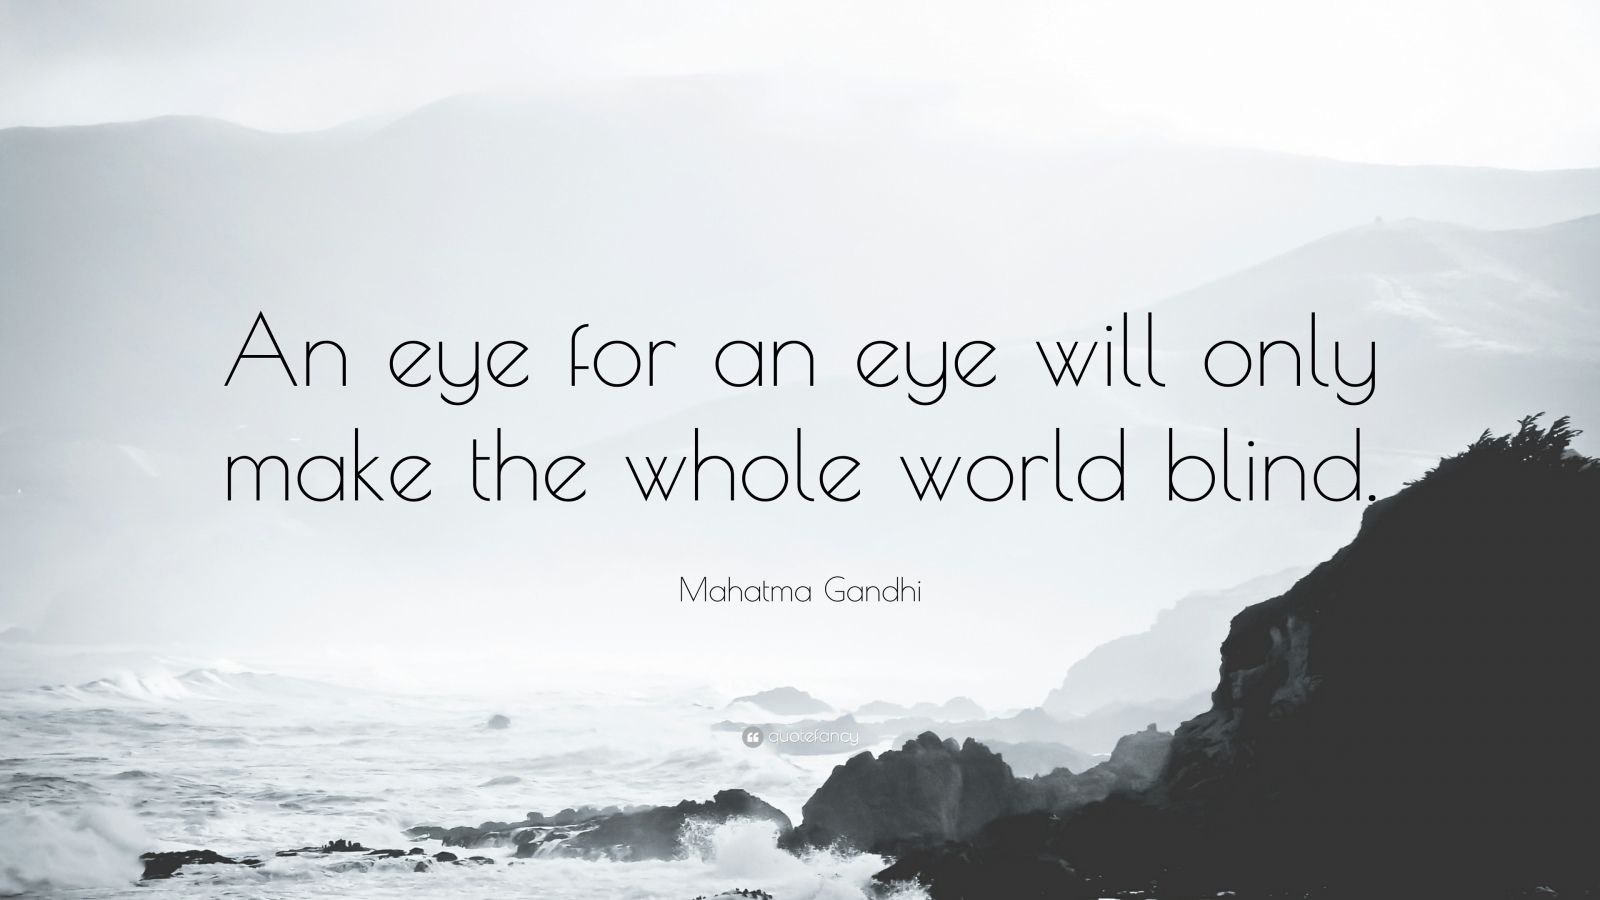 an eye for an eye makes the whole world blind quote